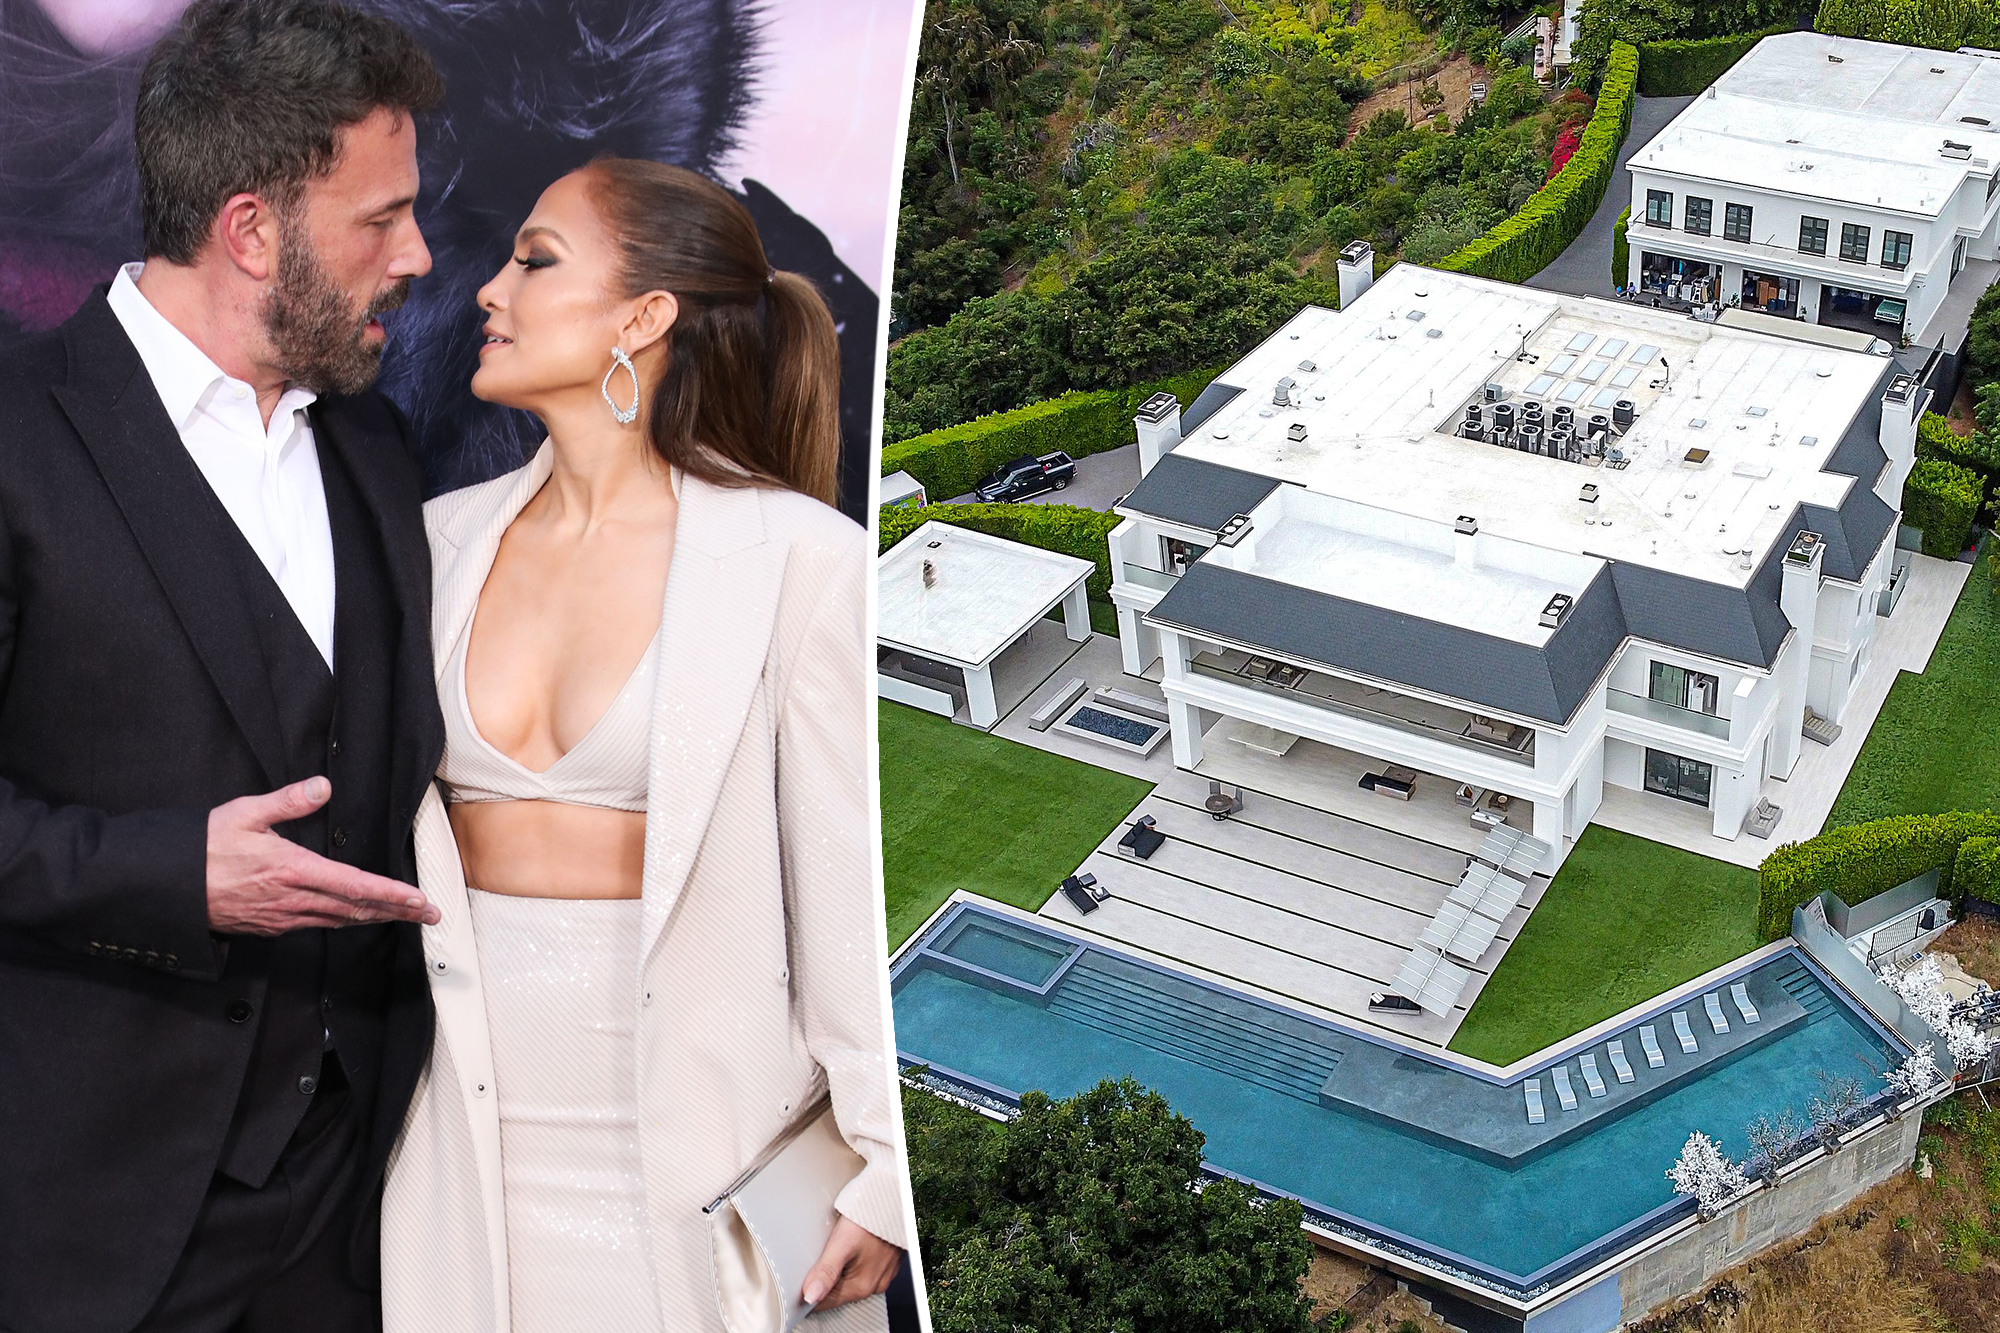 Ben Affleck and Jennifer Lopez's Rush to Sell Mansion Amid Marital Woes Sparks Speculation